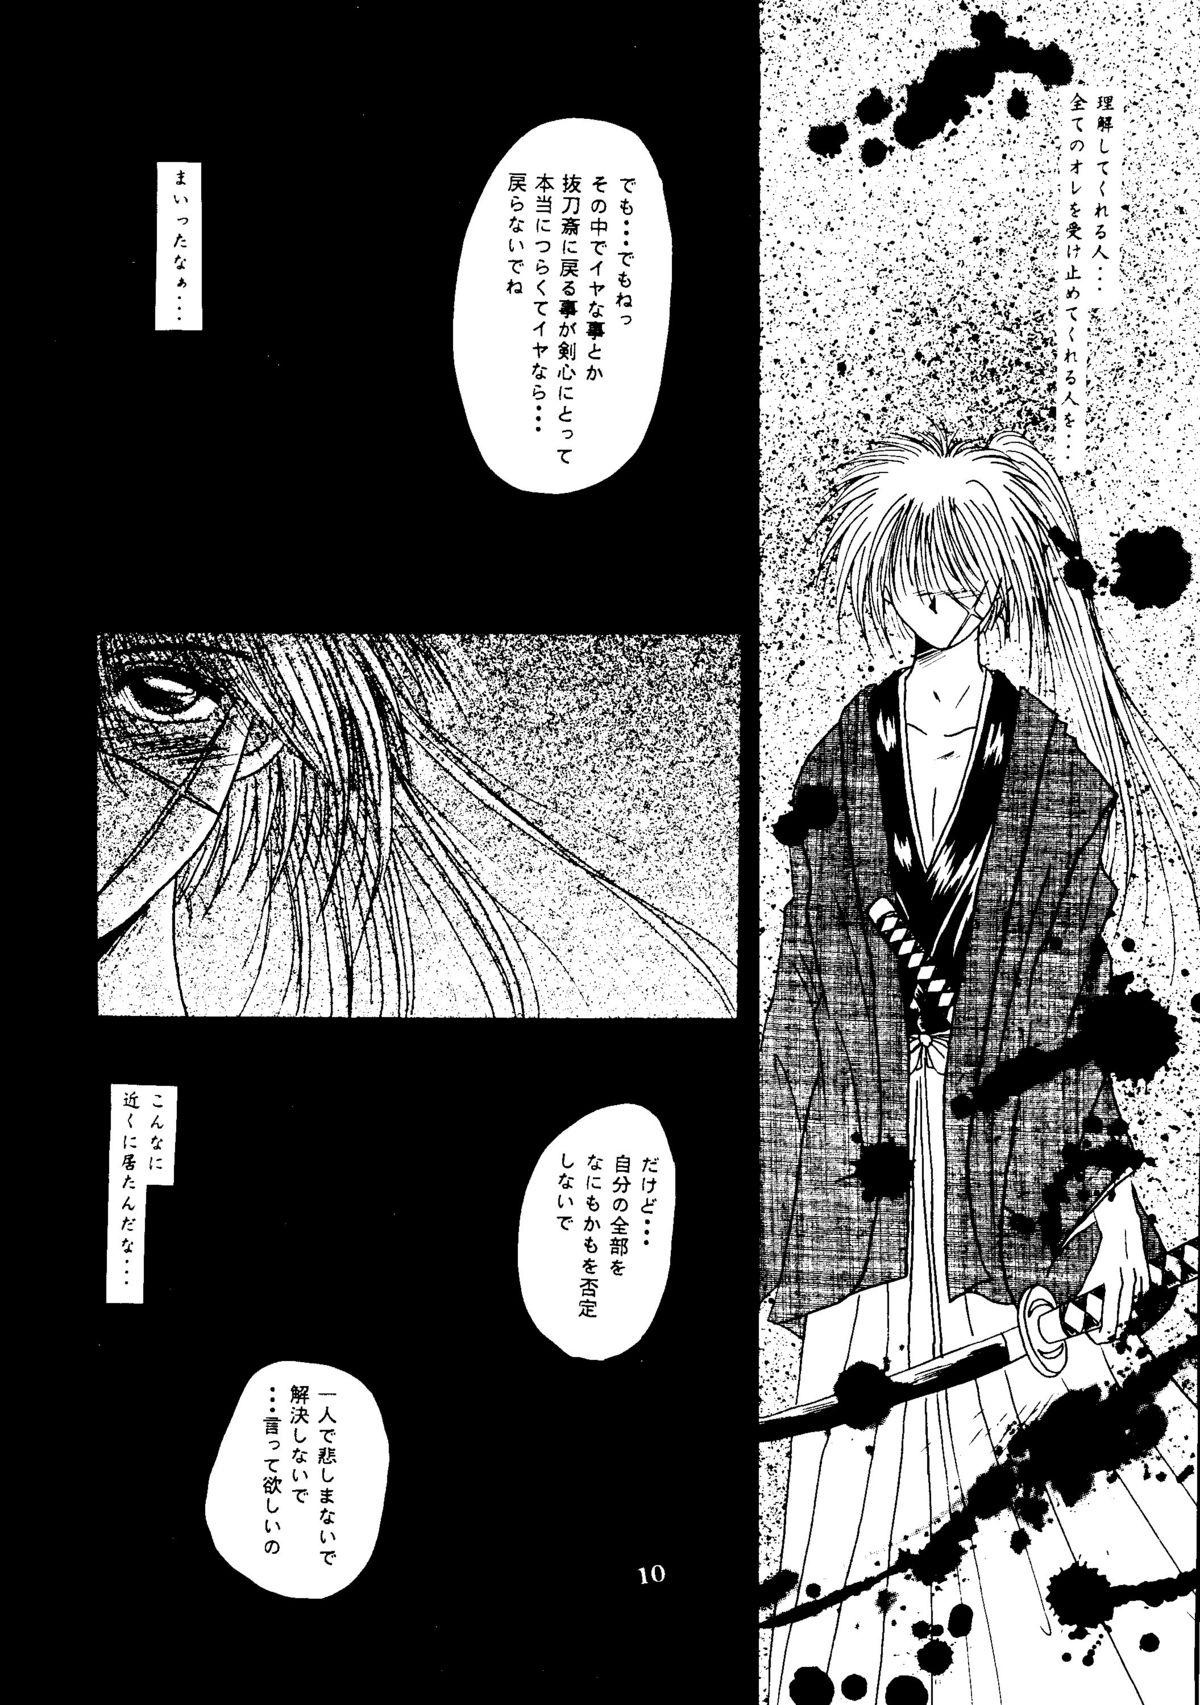 Camgirl I Believe... - Rurouni kenshin Gay 3some - Page 9